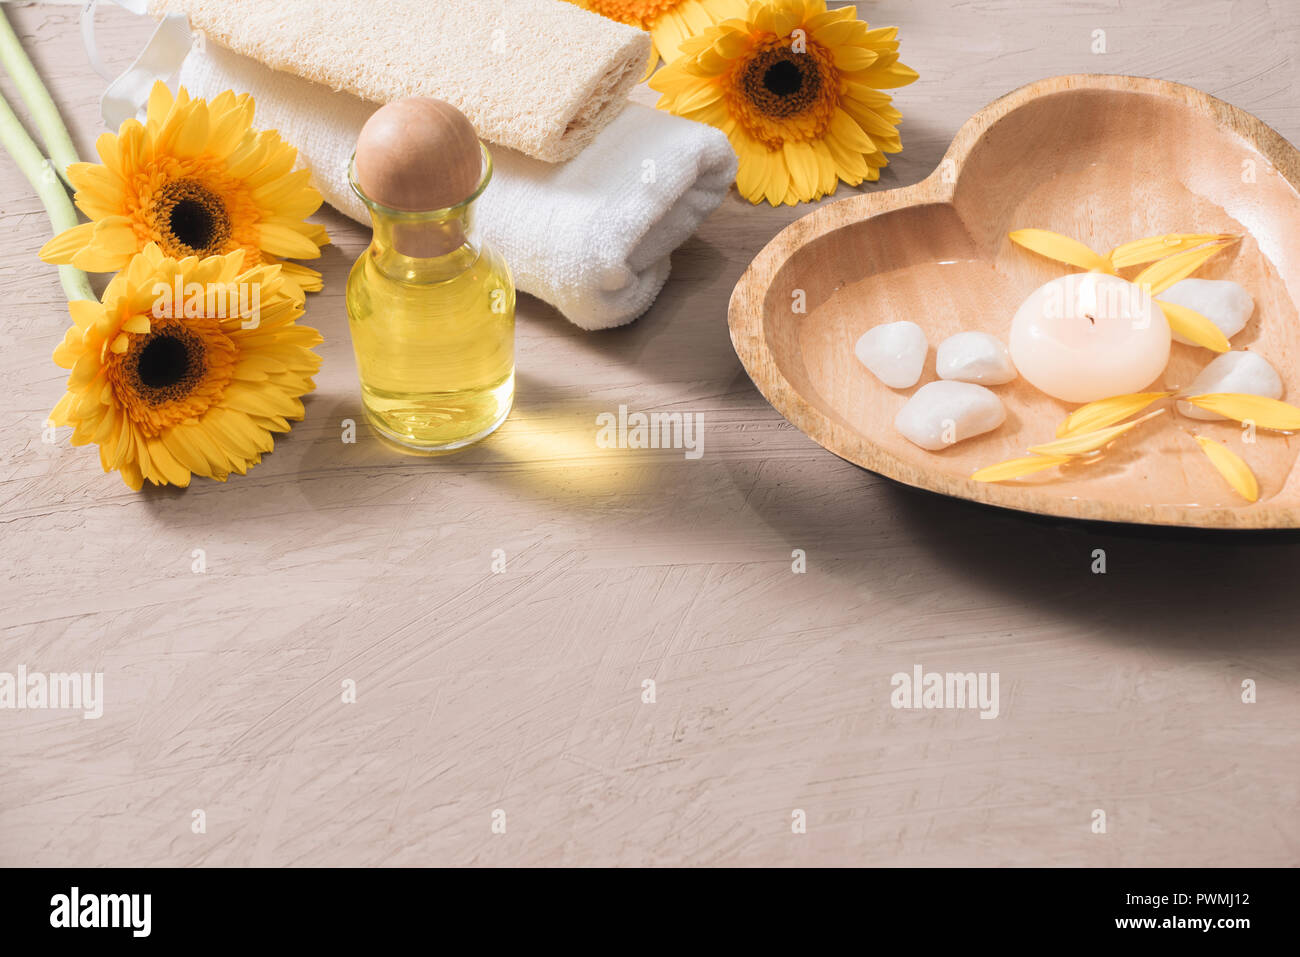 Flowers for spa. Spa composition with daisy flowers. Stock Photo